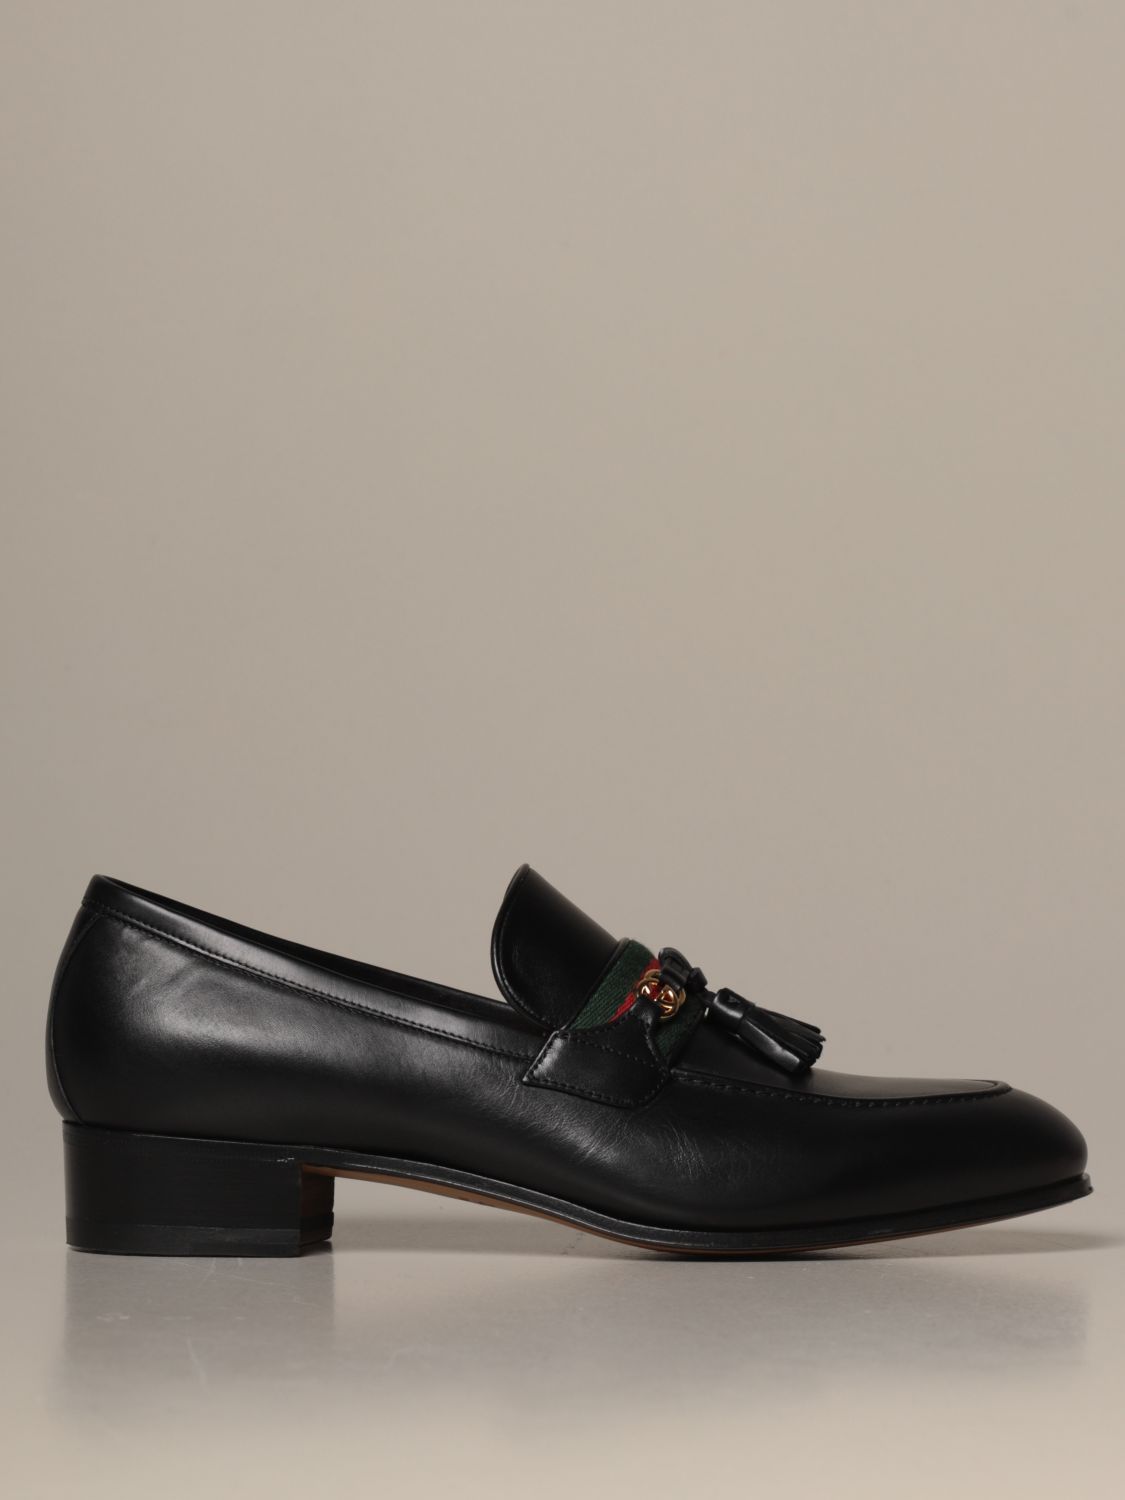 GUCCI: Paride loafers in with Web band - Black | Gucci loafers 624720 1W610 online on GIGLIO.COM